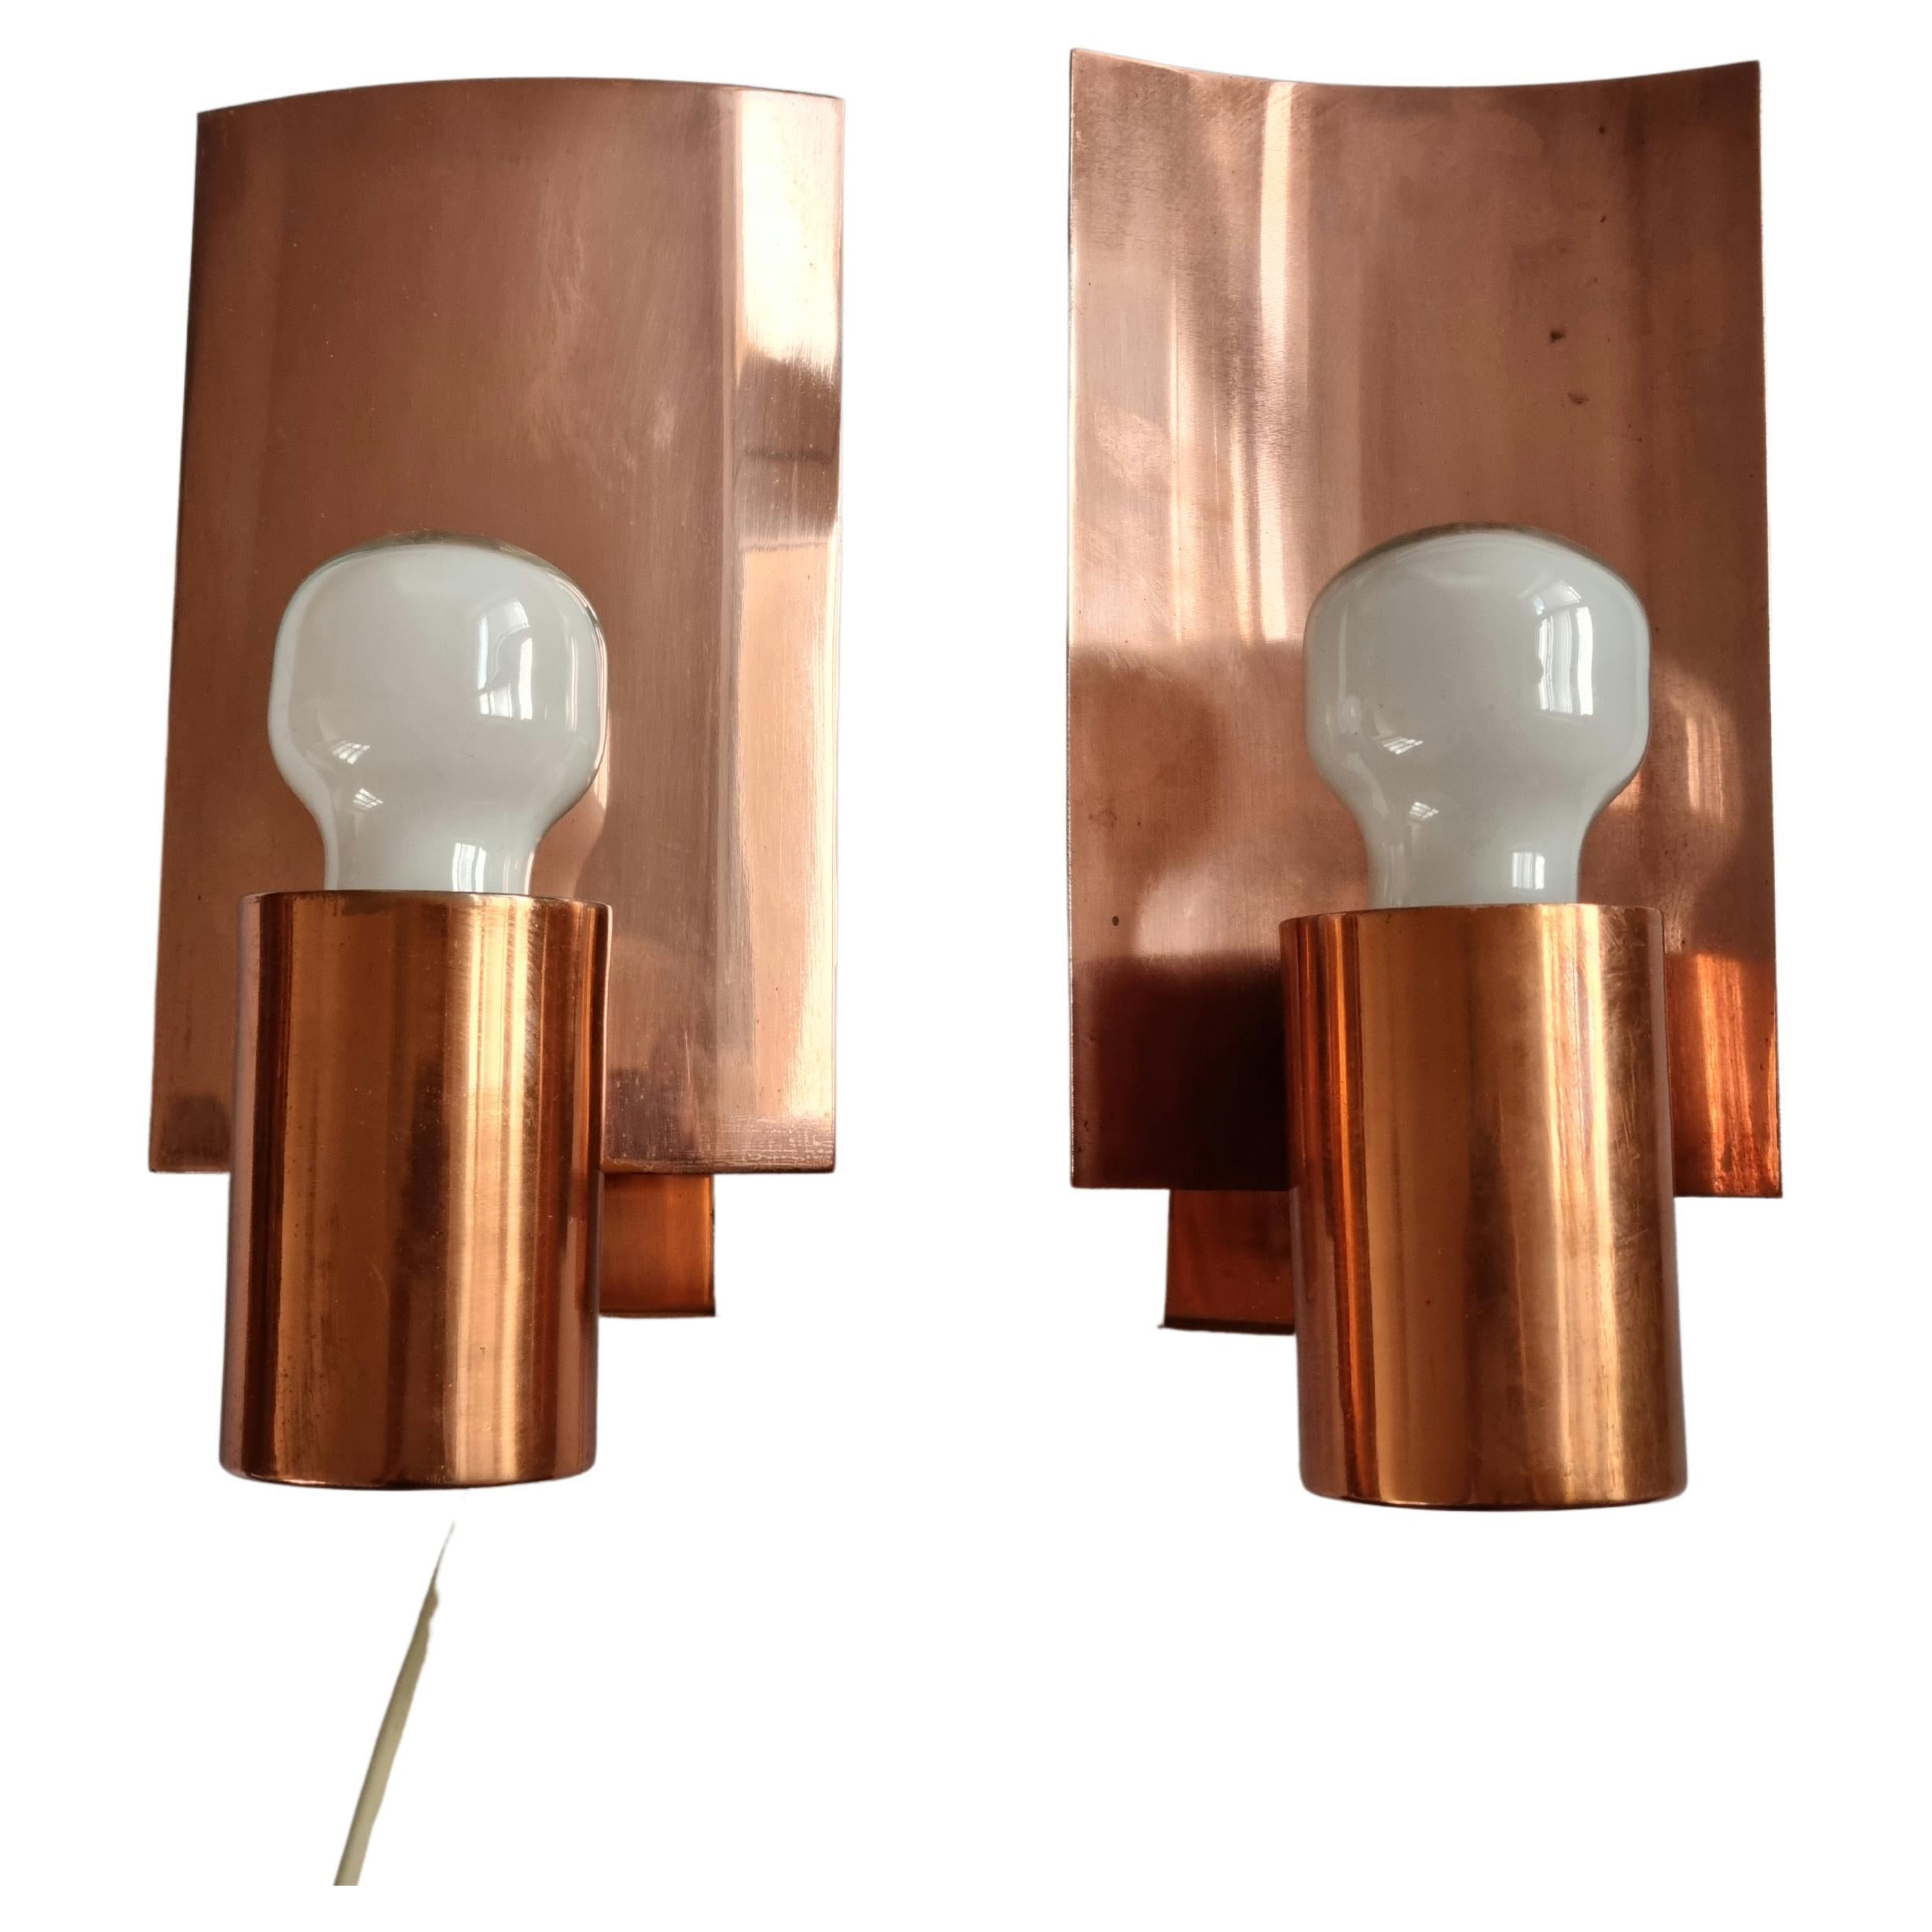 Pair of Midcentury Copper Wall Lamps, Denmark, 1960s For Sale